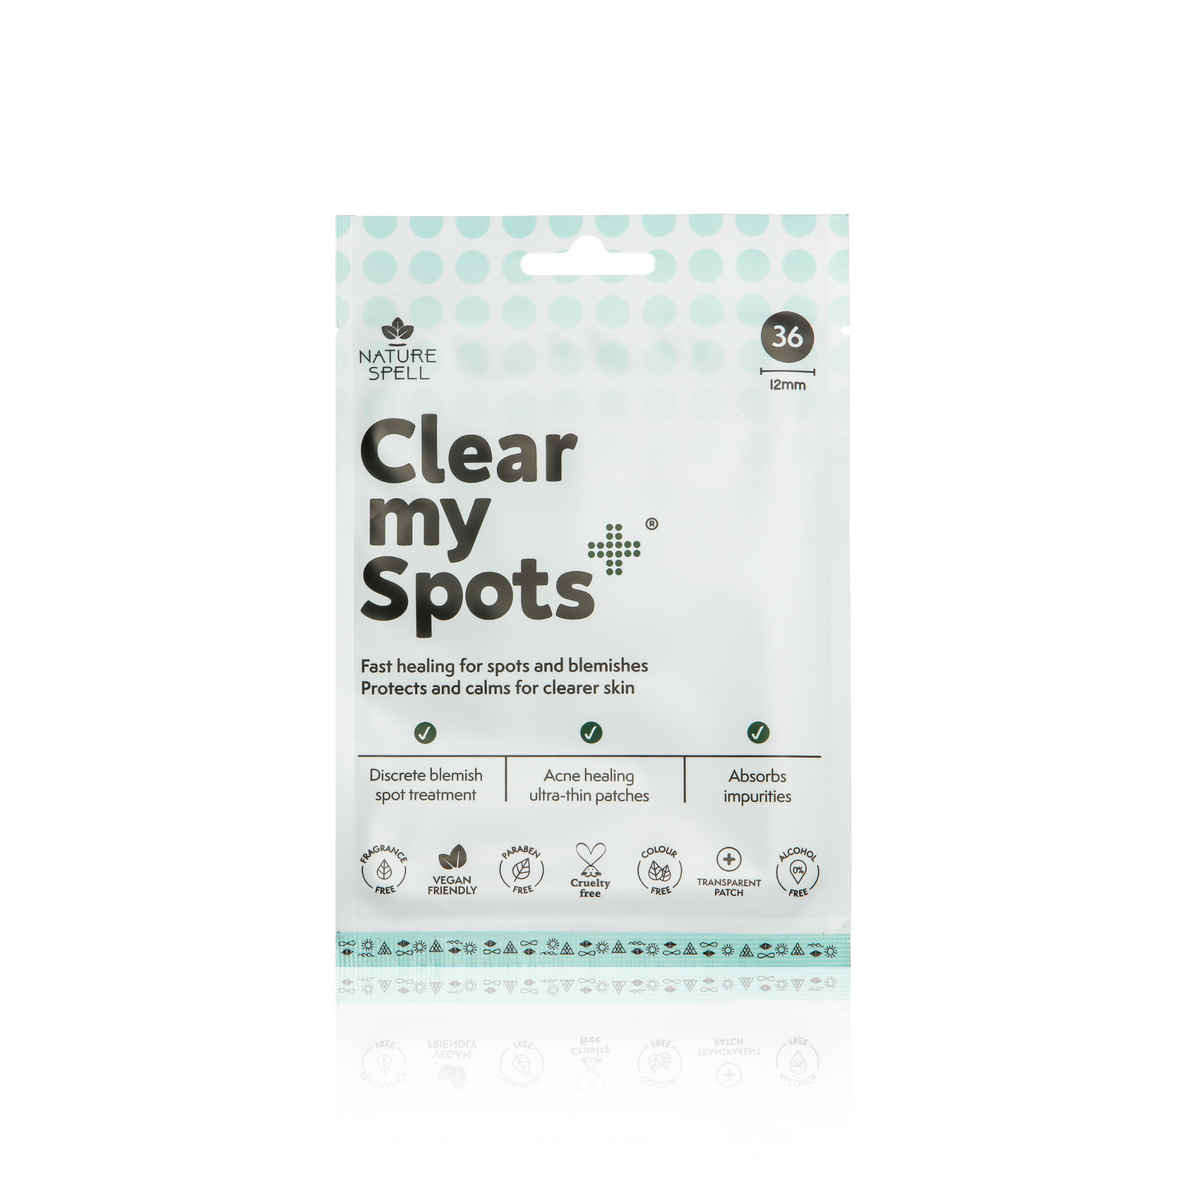 Parches Faciales Nature Spell Clear My Spot 36 Unidades